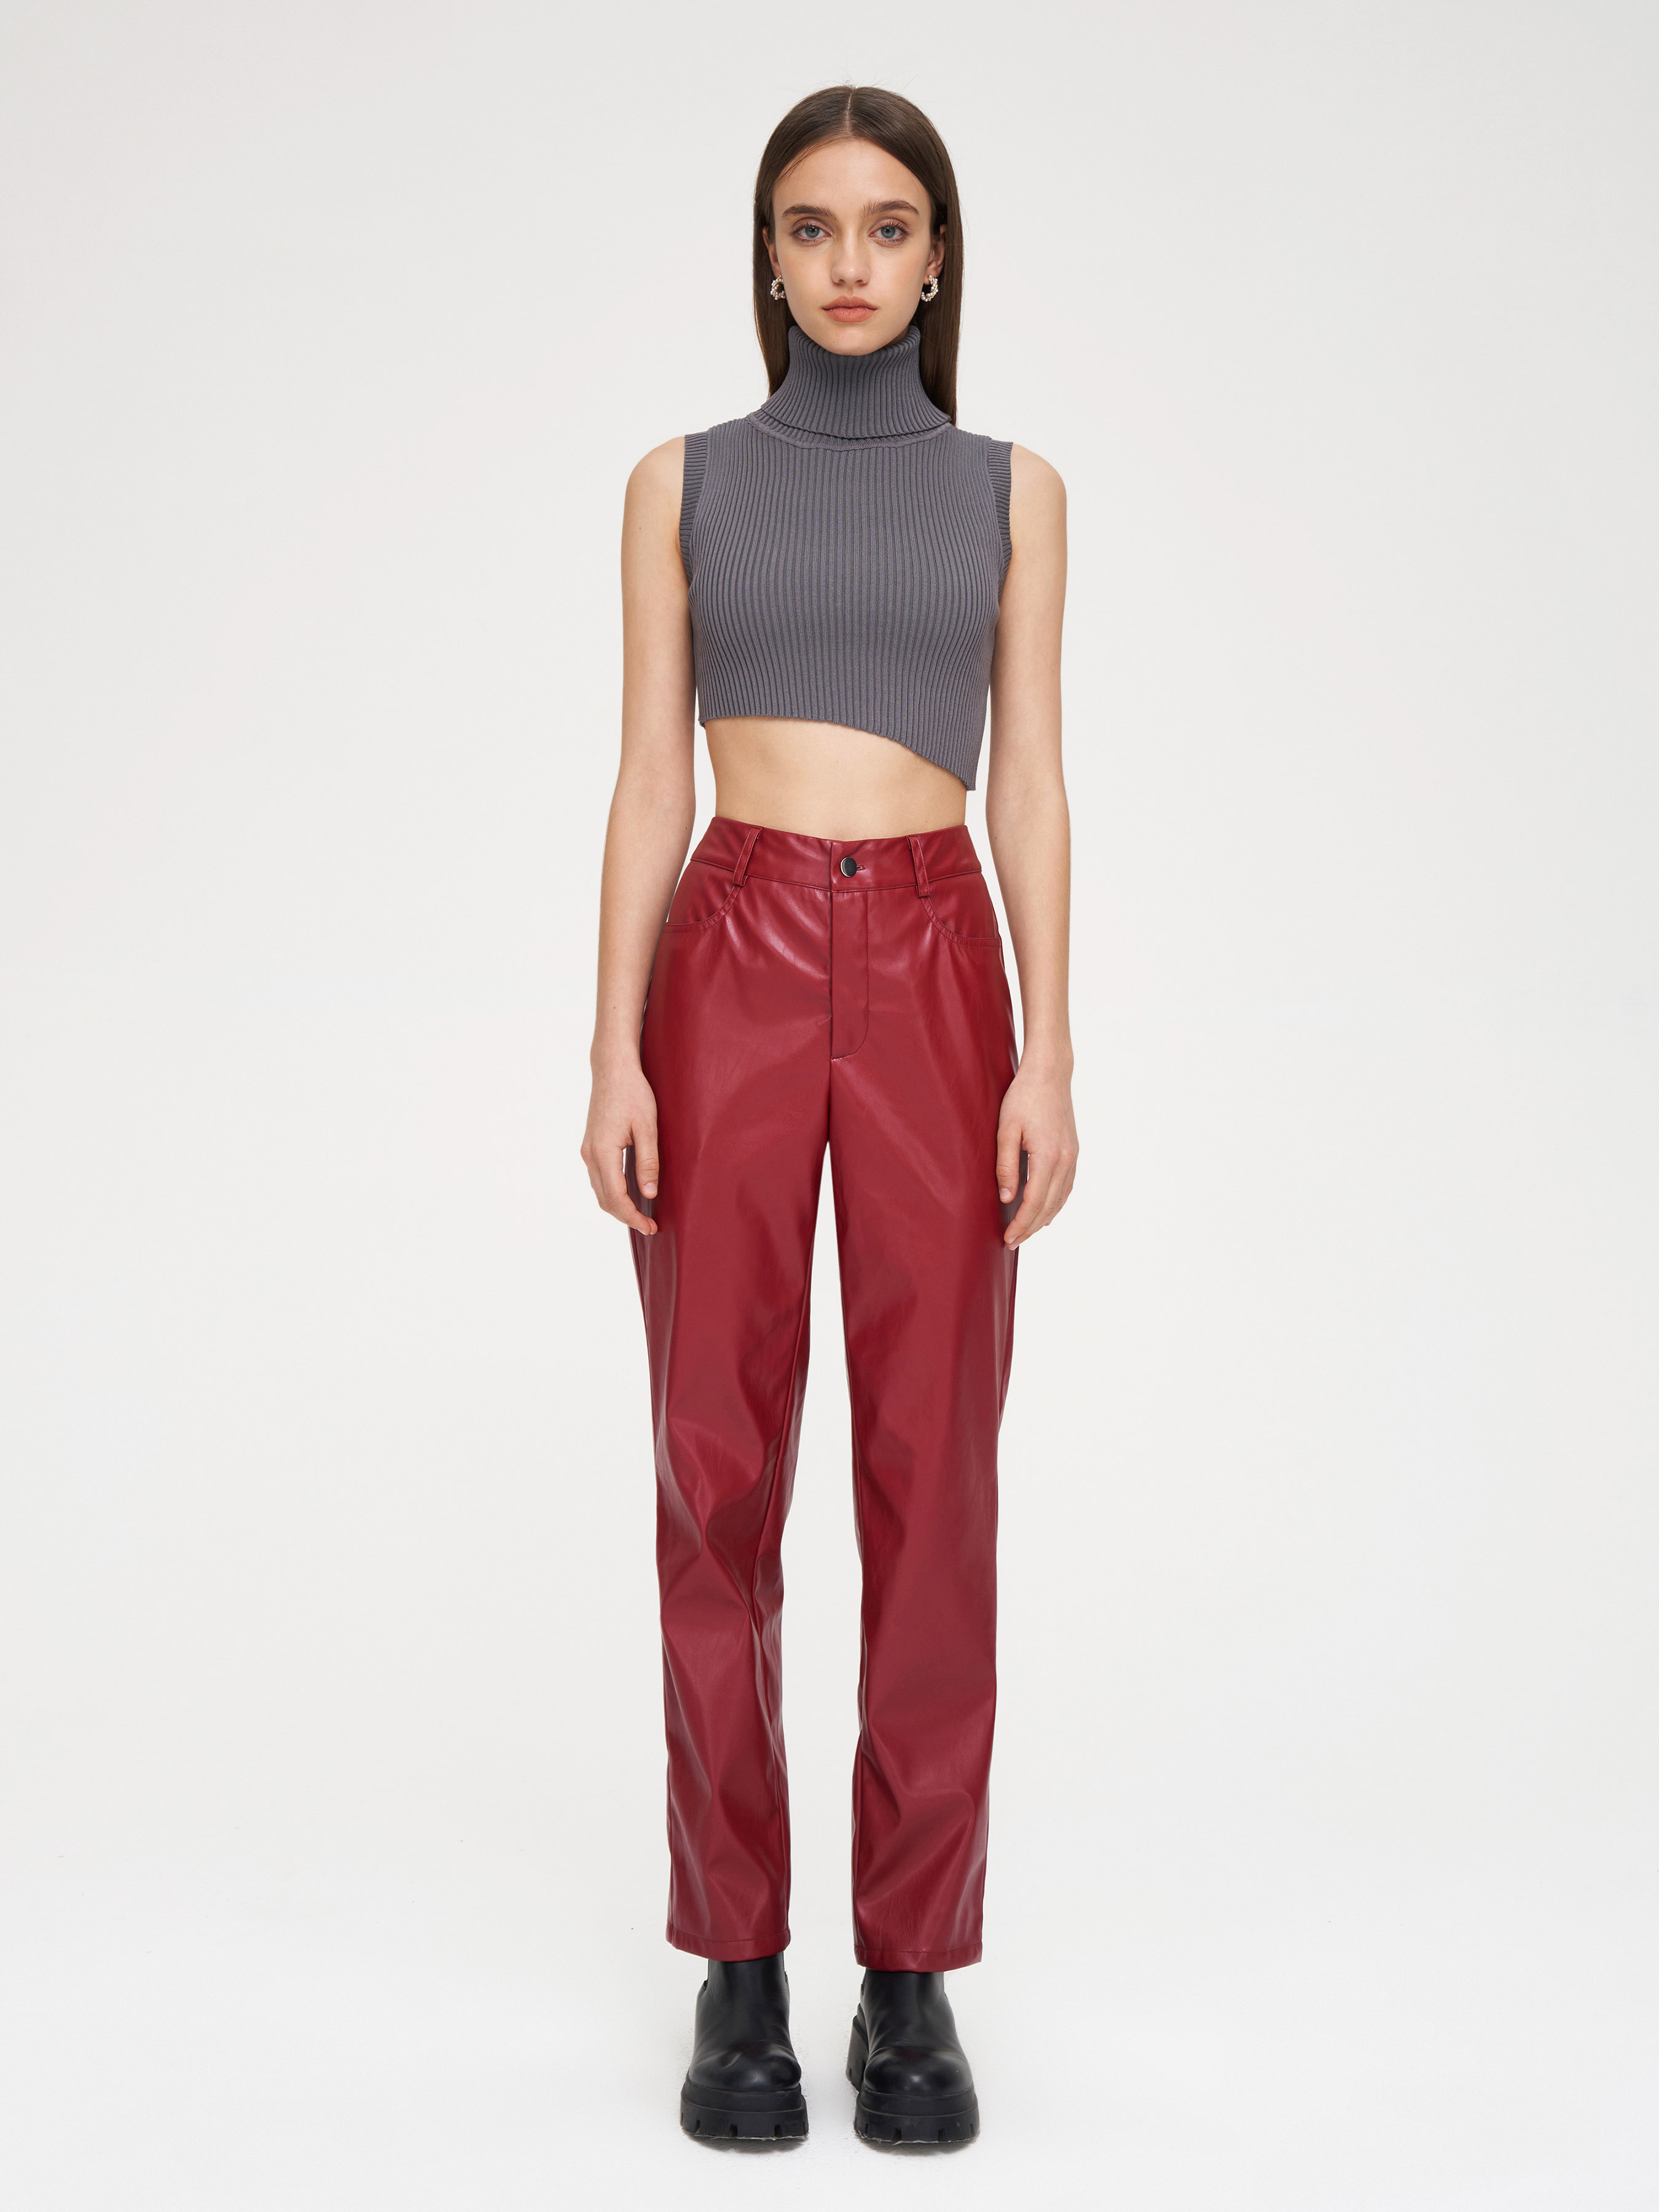 Red Straight Leg Leather Pants